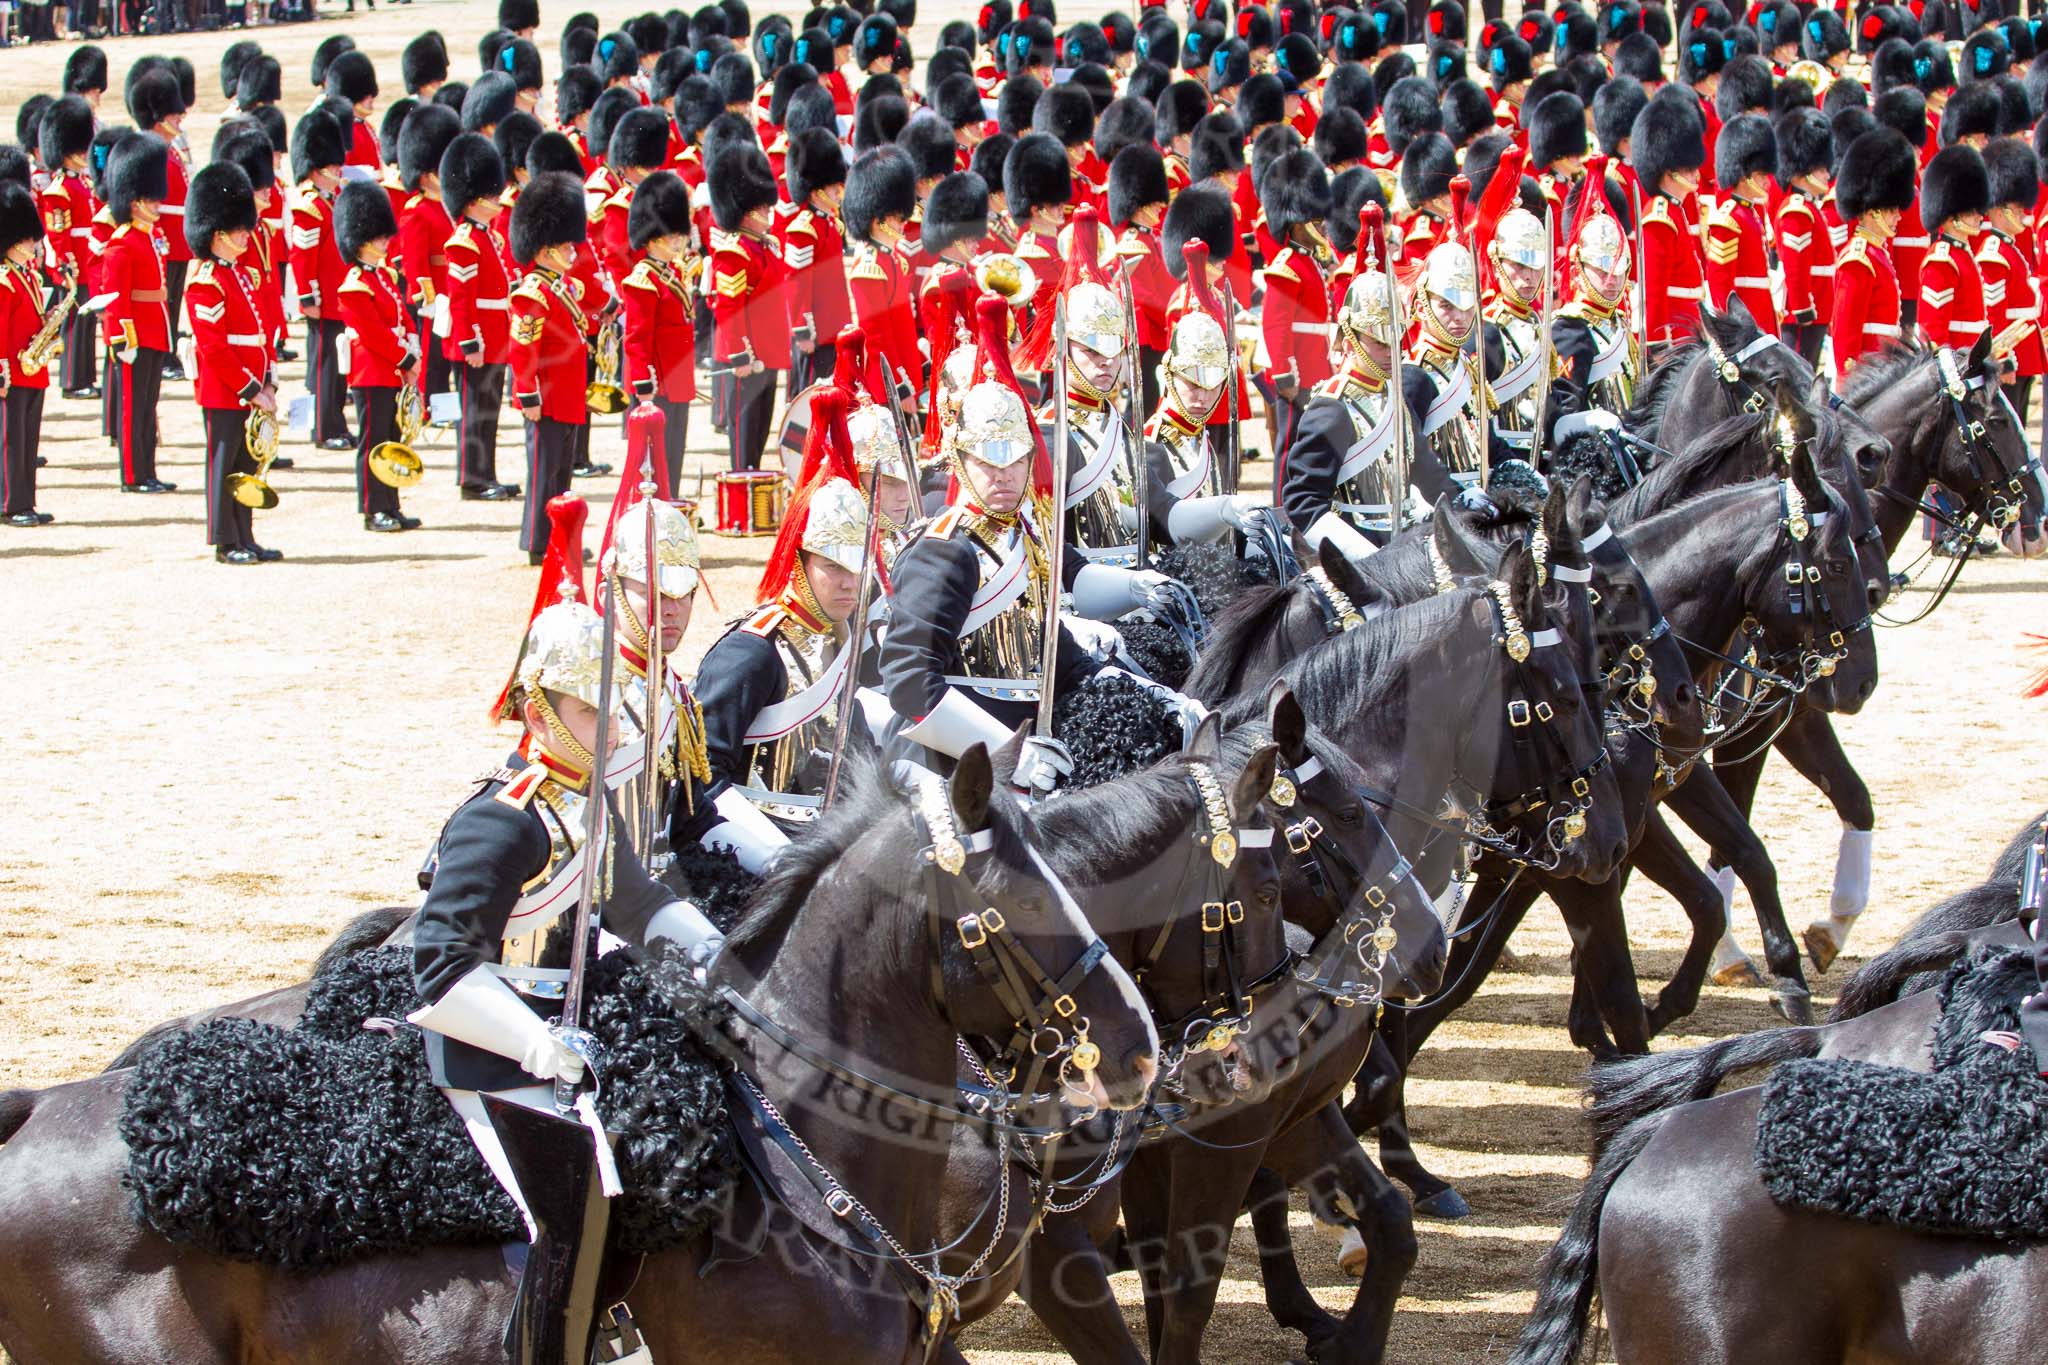 Trooping the Colour 2013: The Third and Forth Divisions of the Sovereign's Escort, The Blues and Royals, during the Ride Past. Image #700, 15 June 2013 11:56 Horse Guards Parade, London, UK